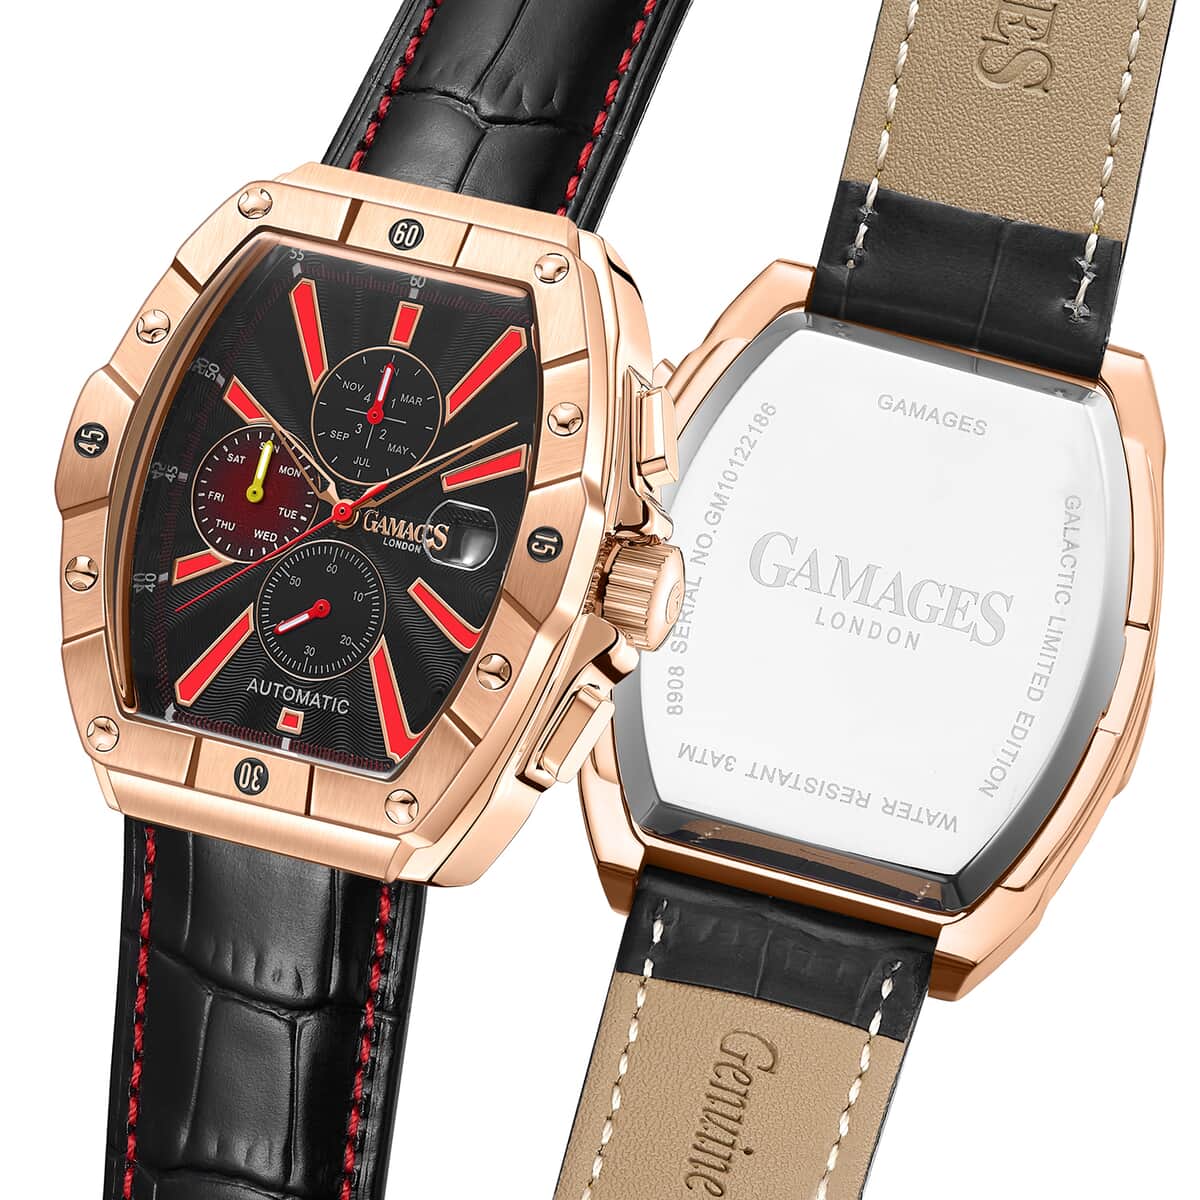 GAMAGES OF LONDON Limited Edition Hand Assembled Galactic Automatic Movement Genuine Leather Strap Watch in Black (43mm) image number 4